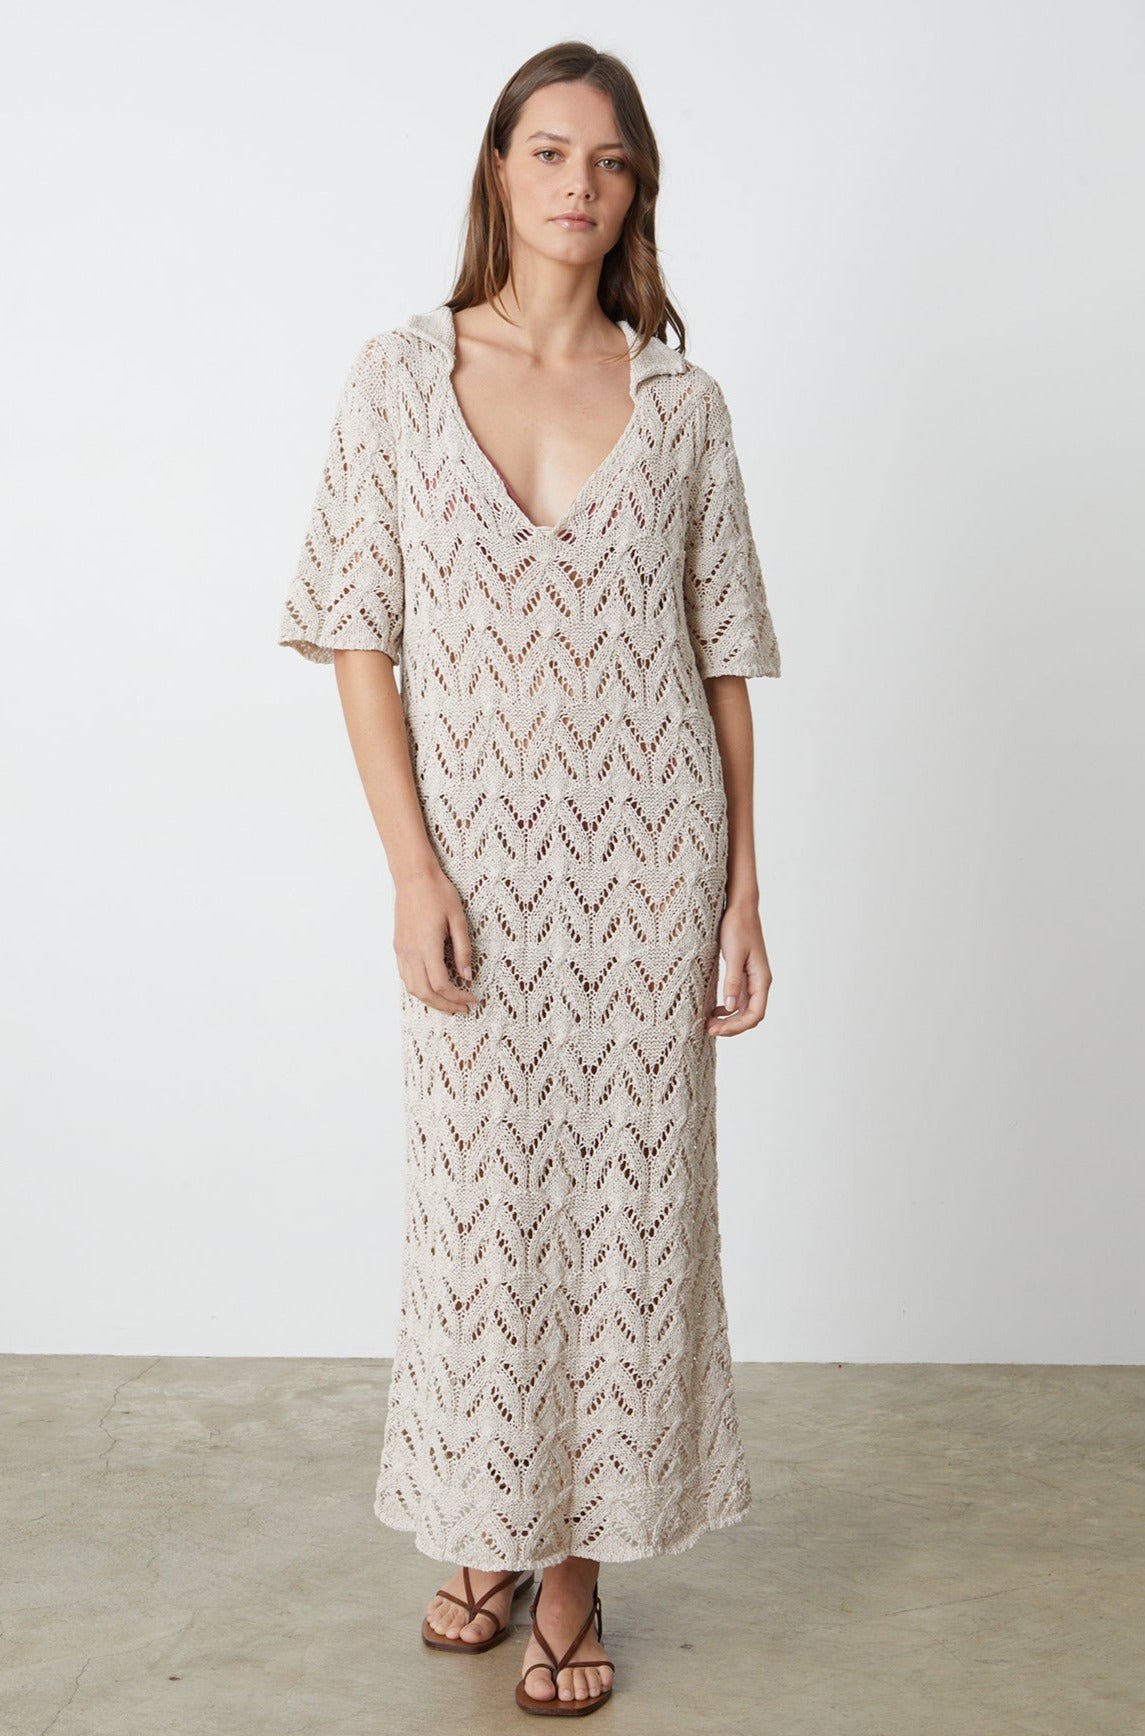 Jacqueline Crochet Stitch Maxi Dress in putty with brown sandals full length front-26296066769089